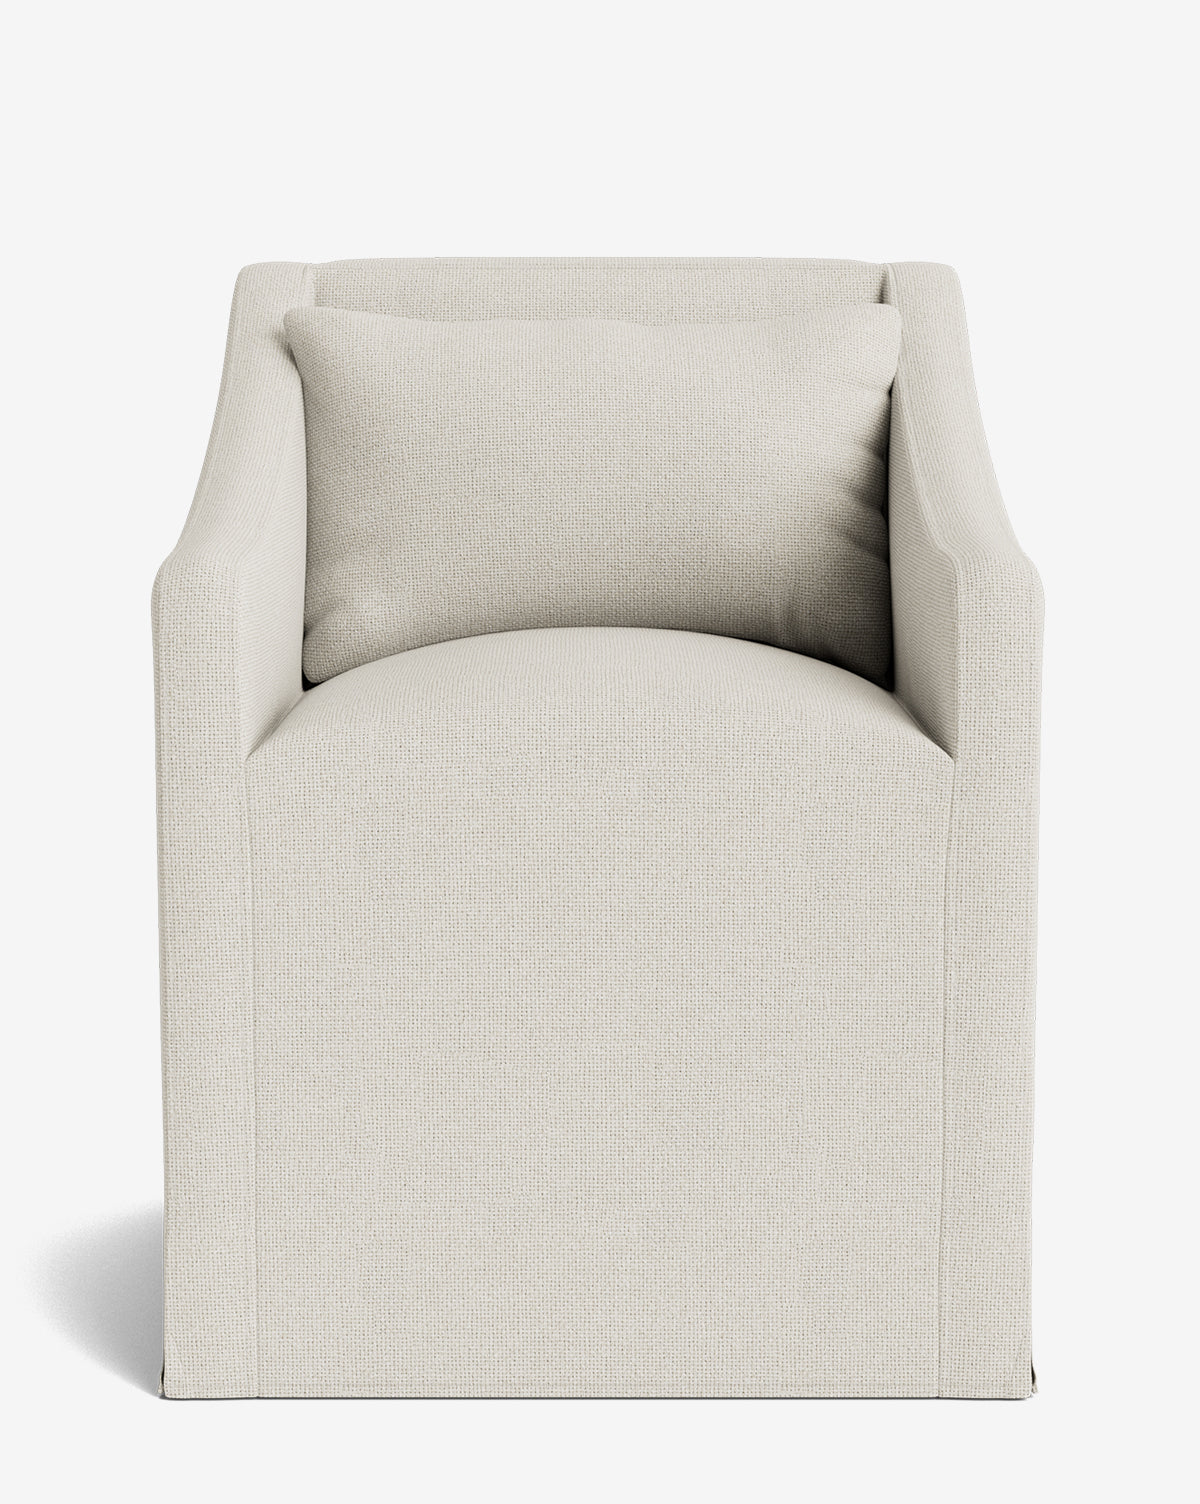 Rowe Fine Furniture, Olivier Slipcover Dining Arm Chair